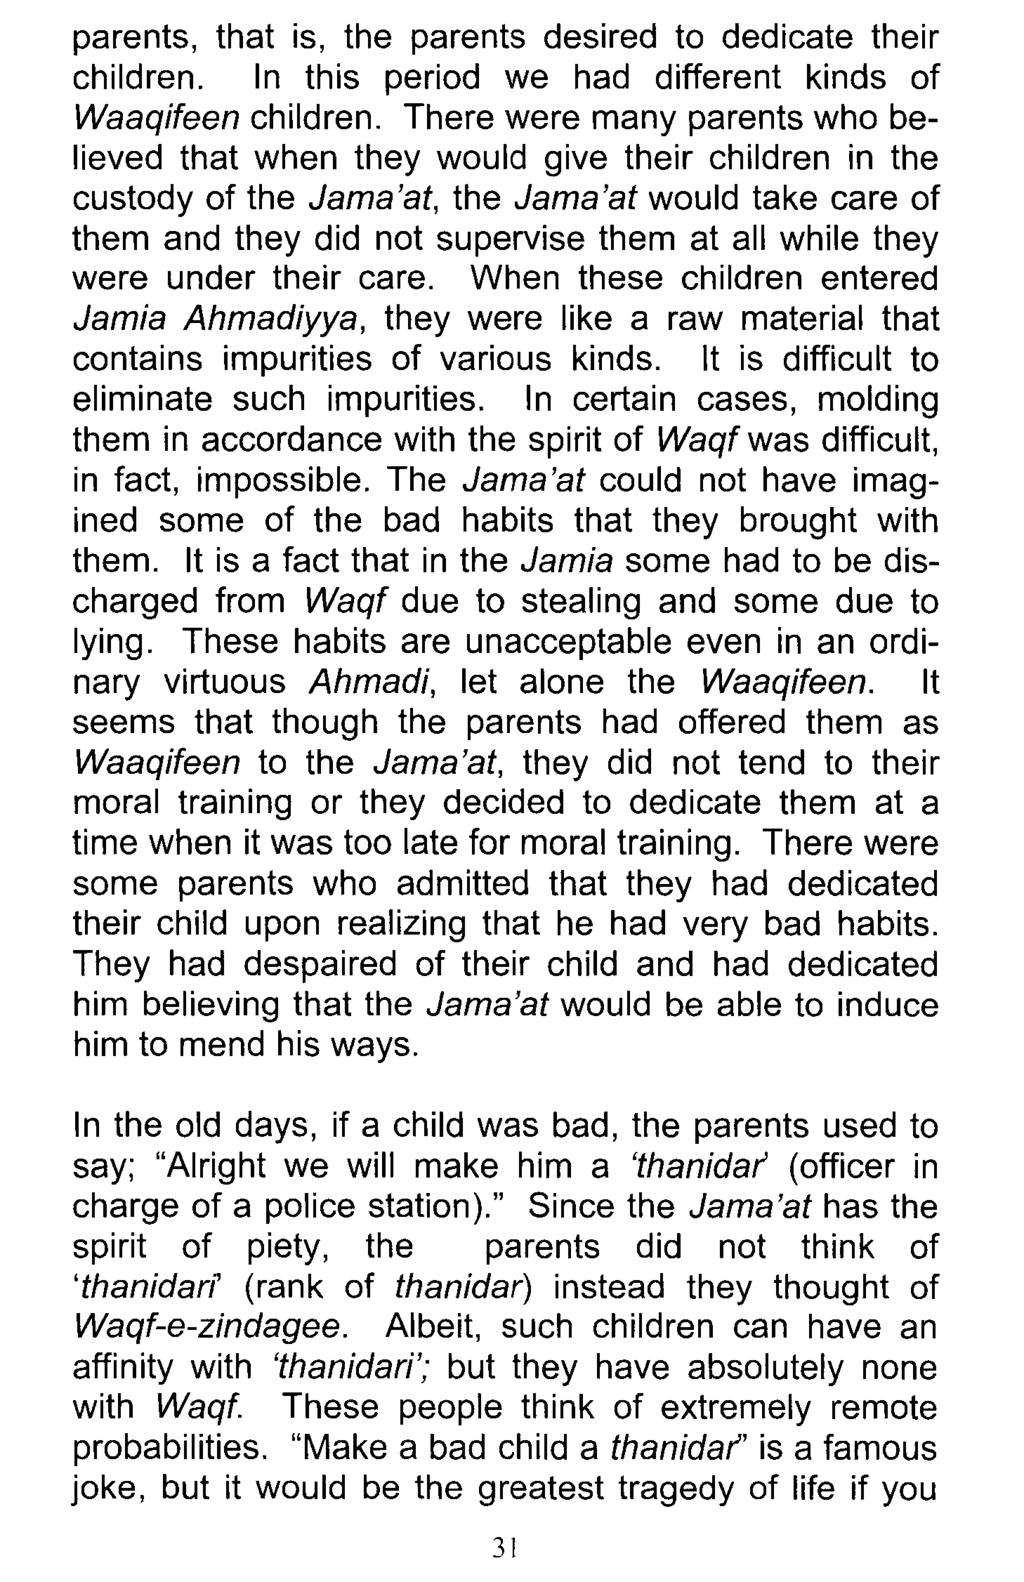 parents, that is, the parents desired to dedicate their children. In this period we had different kinds of Waaqifeen children.